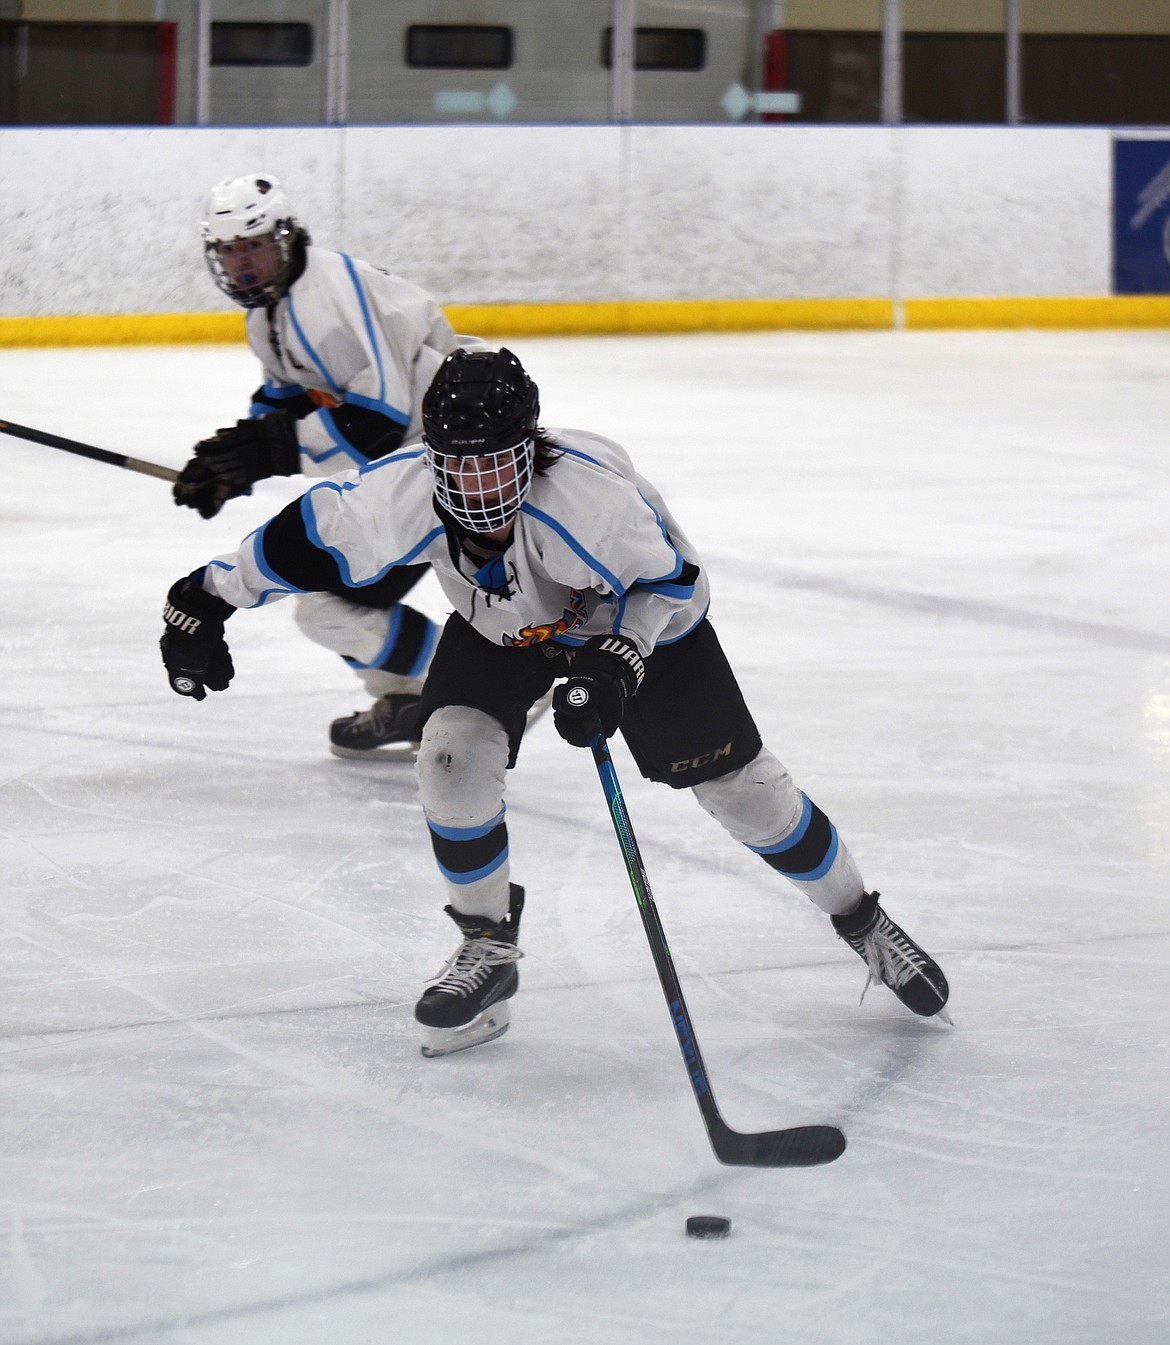 Finn Davidson along with George Herne look to advance the puck into the offensive zone in a game at Stumptown Ice Den earlier this season. (Whitney England/Whitefish Pilot)